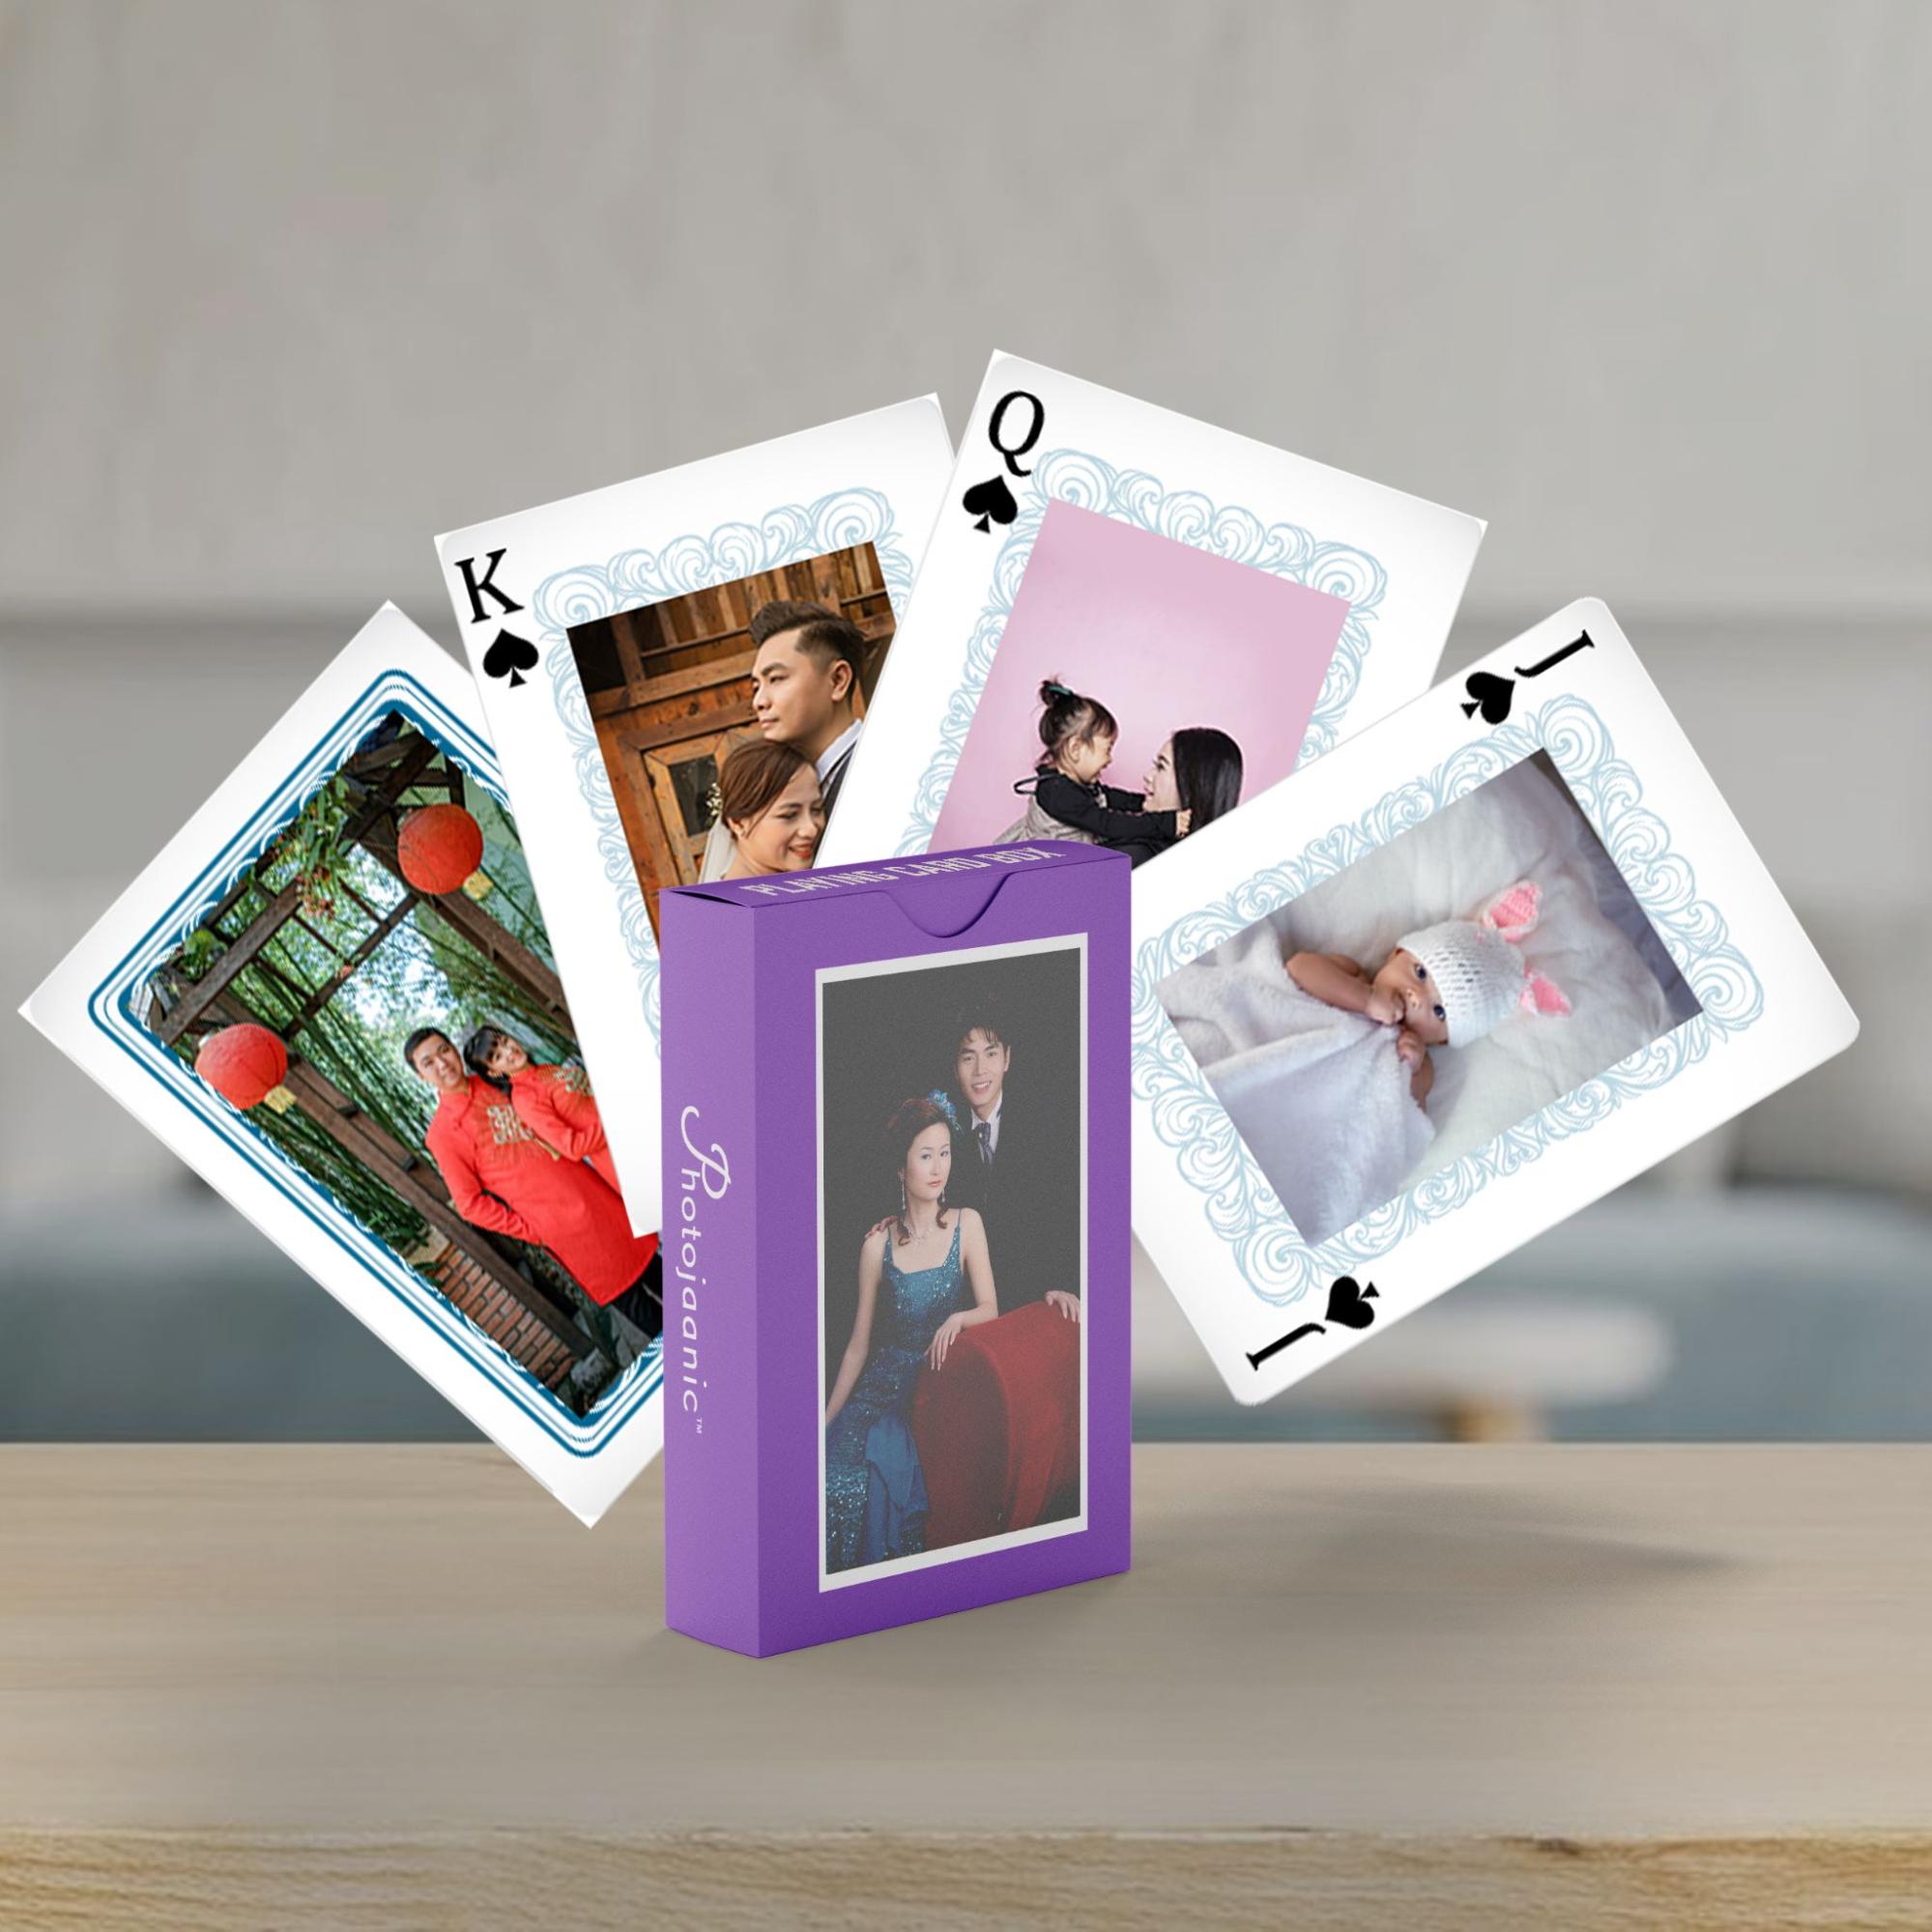 A purple playing card with pictures of a couple, perfect for Christmas gift ideas in Singapore